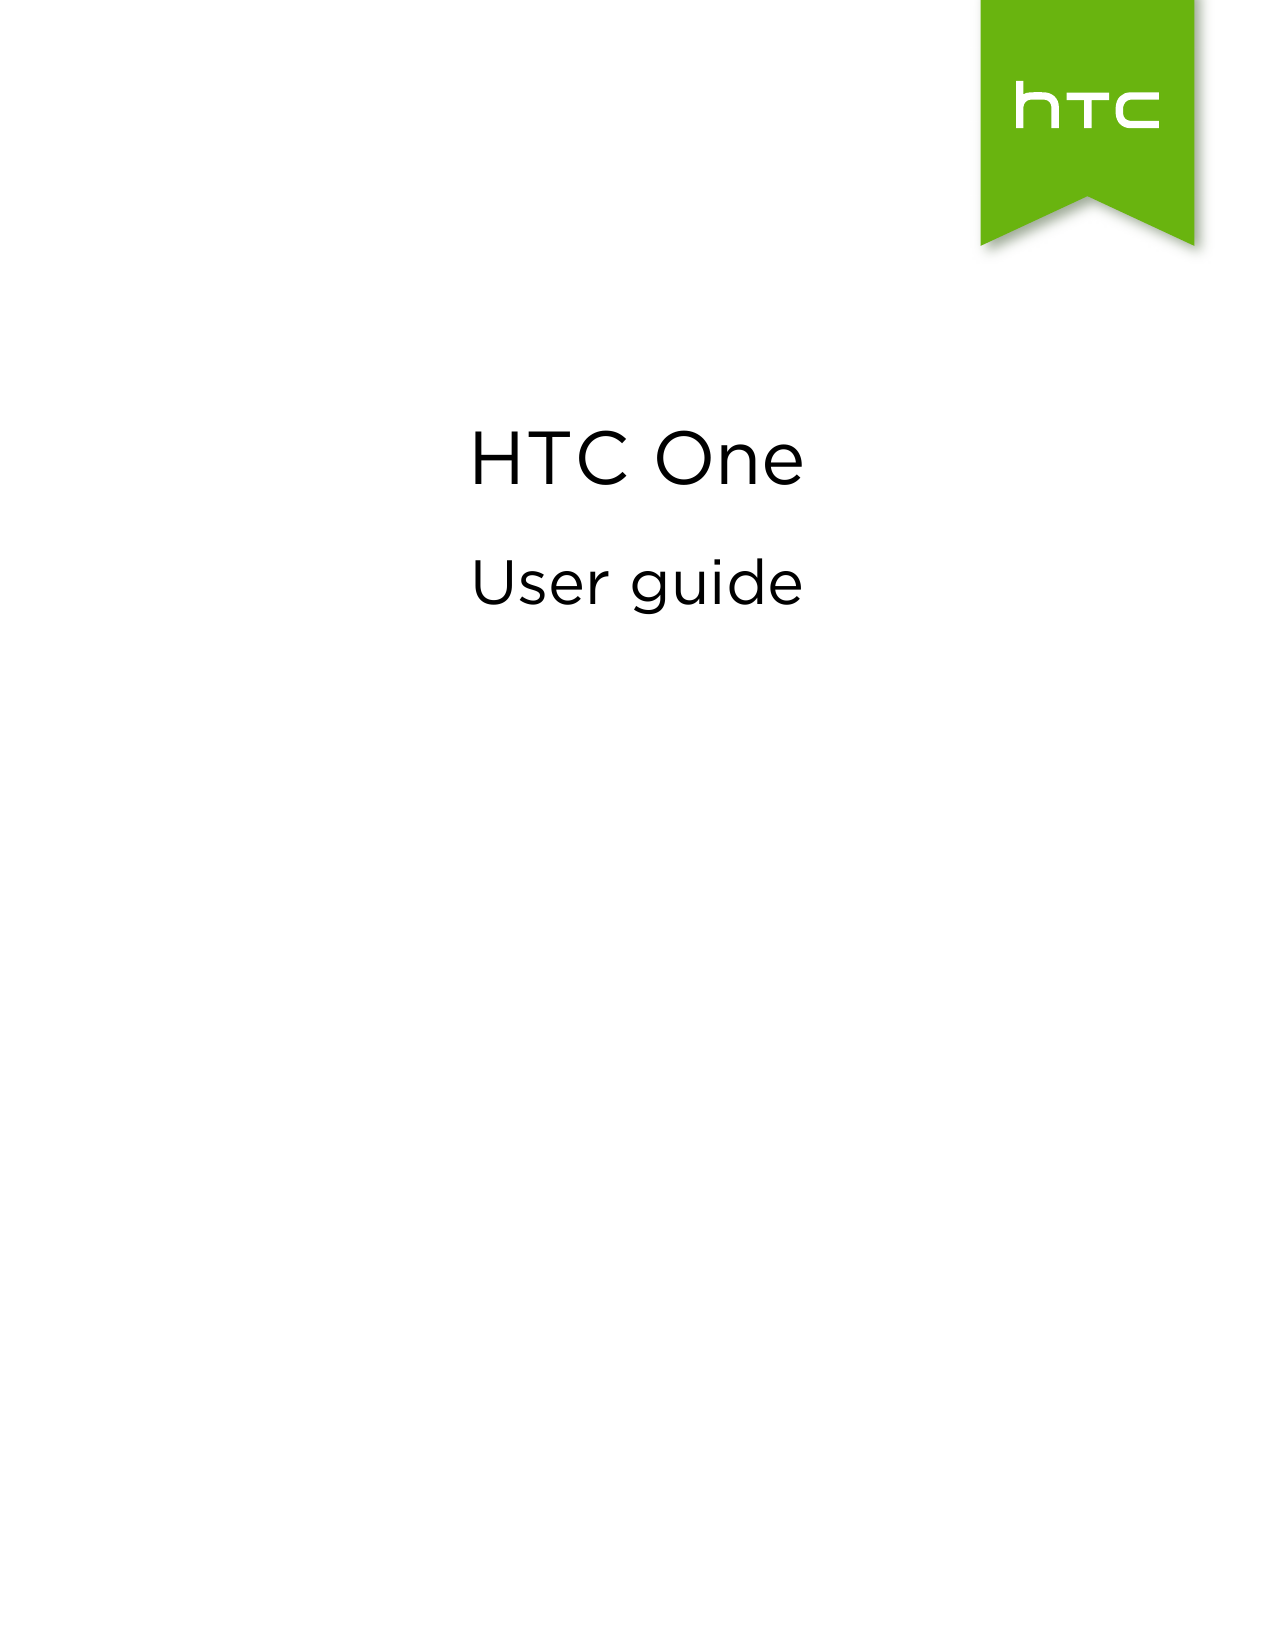 HTC OneUser guide